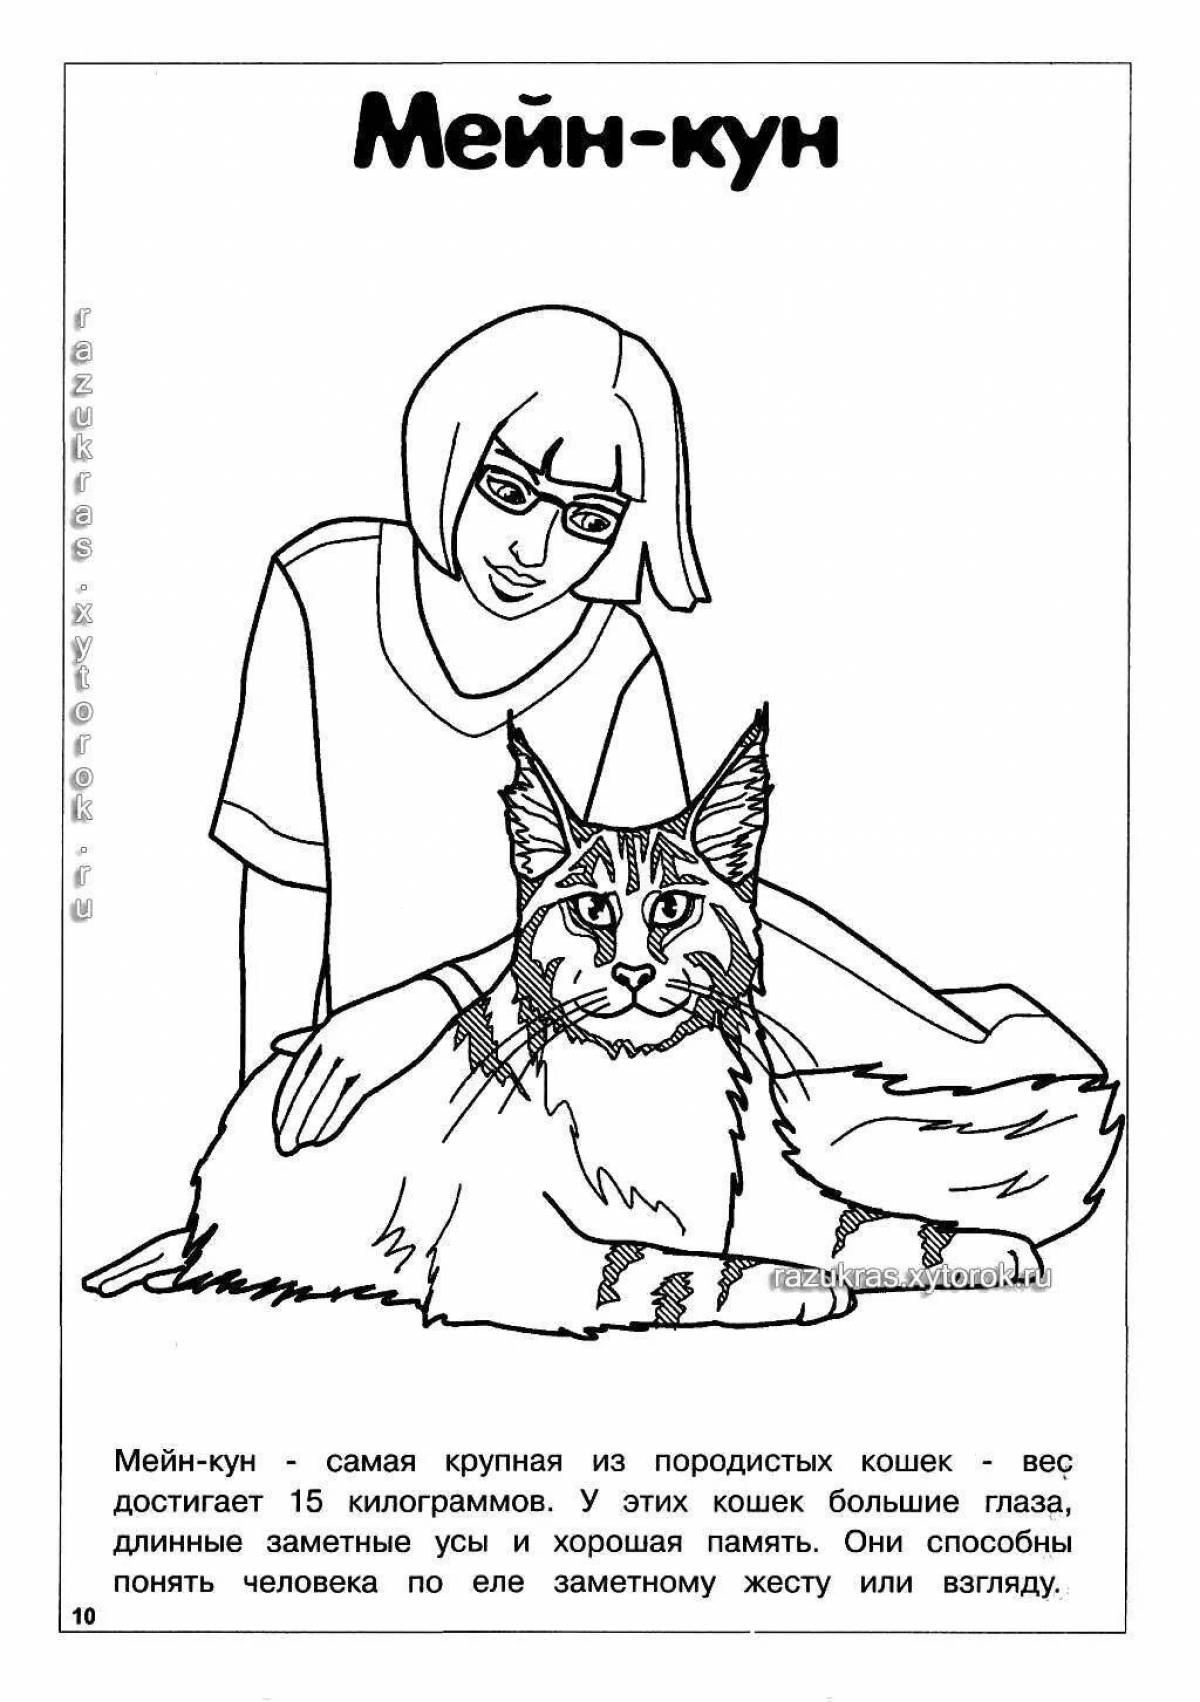 Coloring page adorable Maine Coon cat